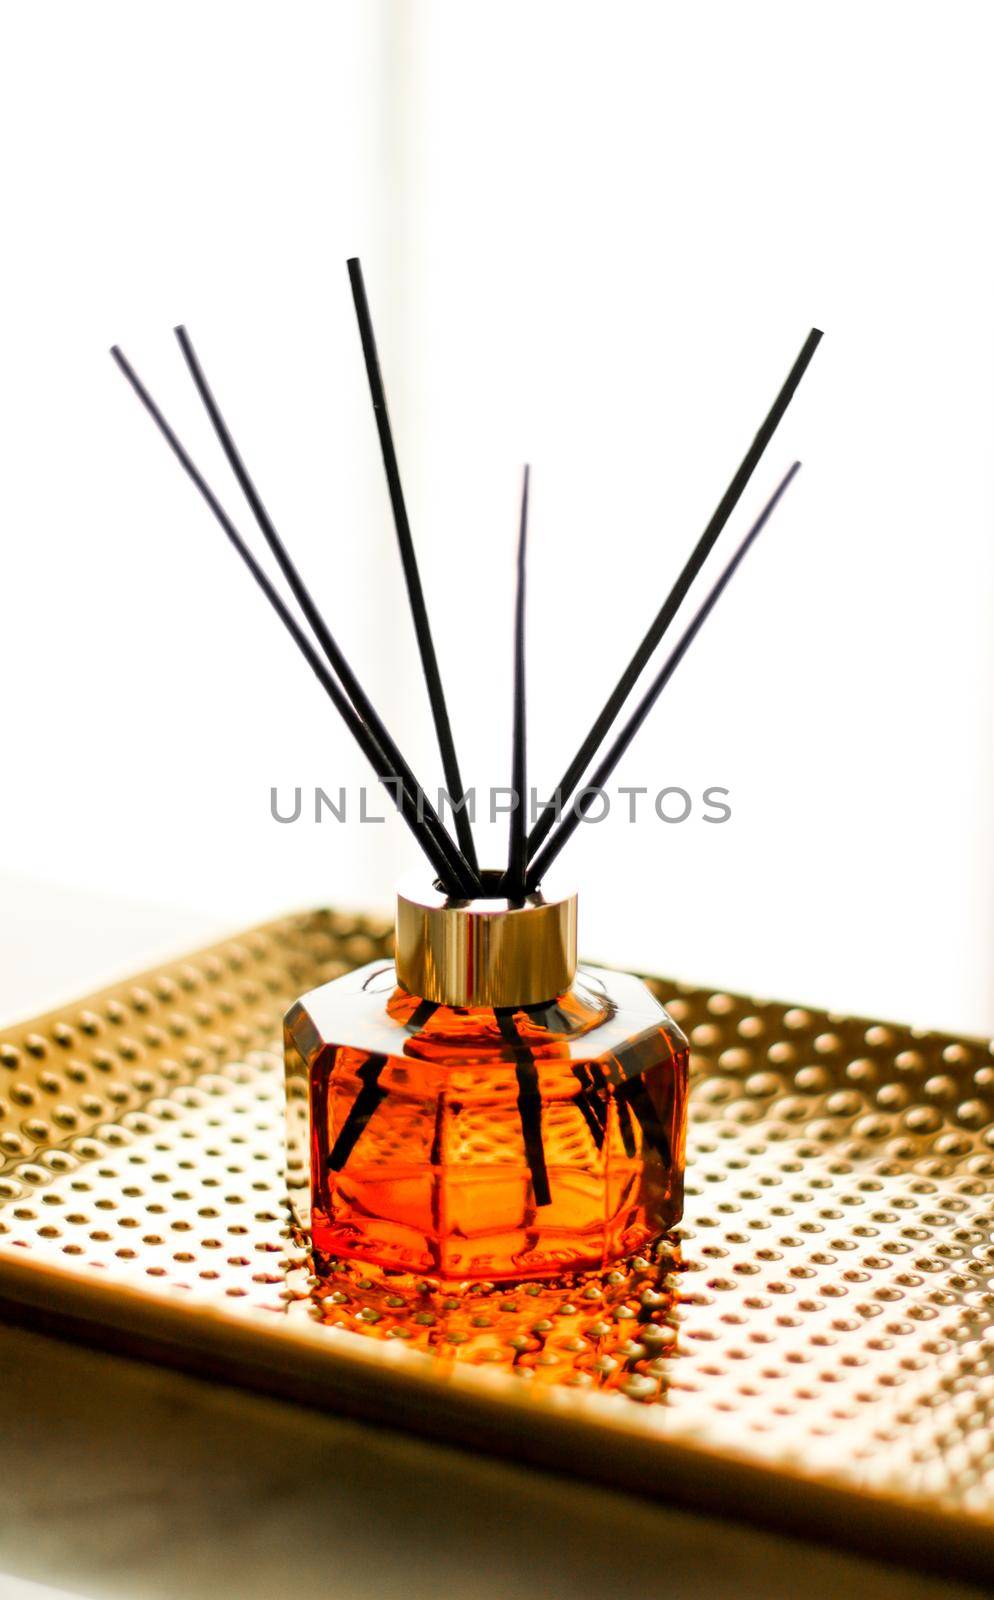 Air freshener, reed diffuser and aromatherapy concept - Home fragrance bottle, european luxury house decor and interior design details